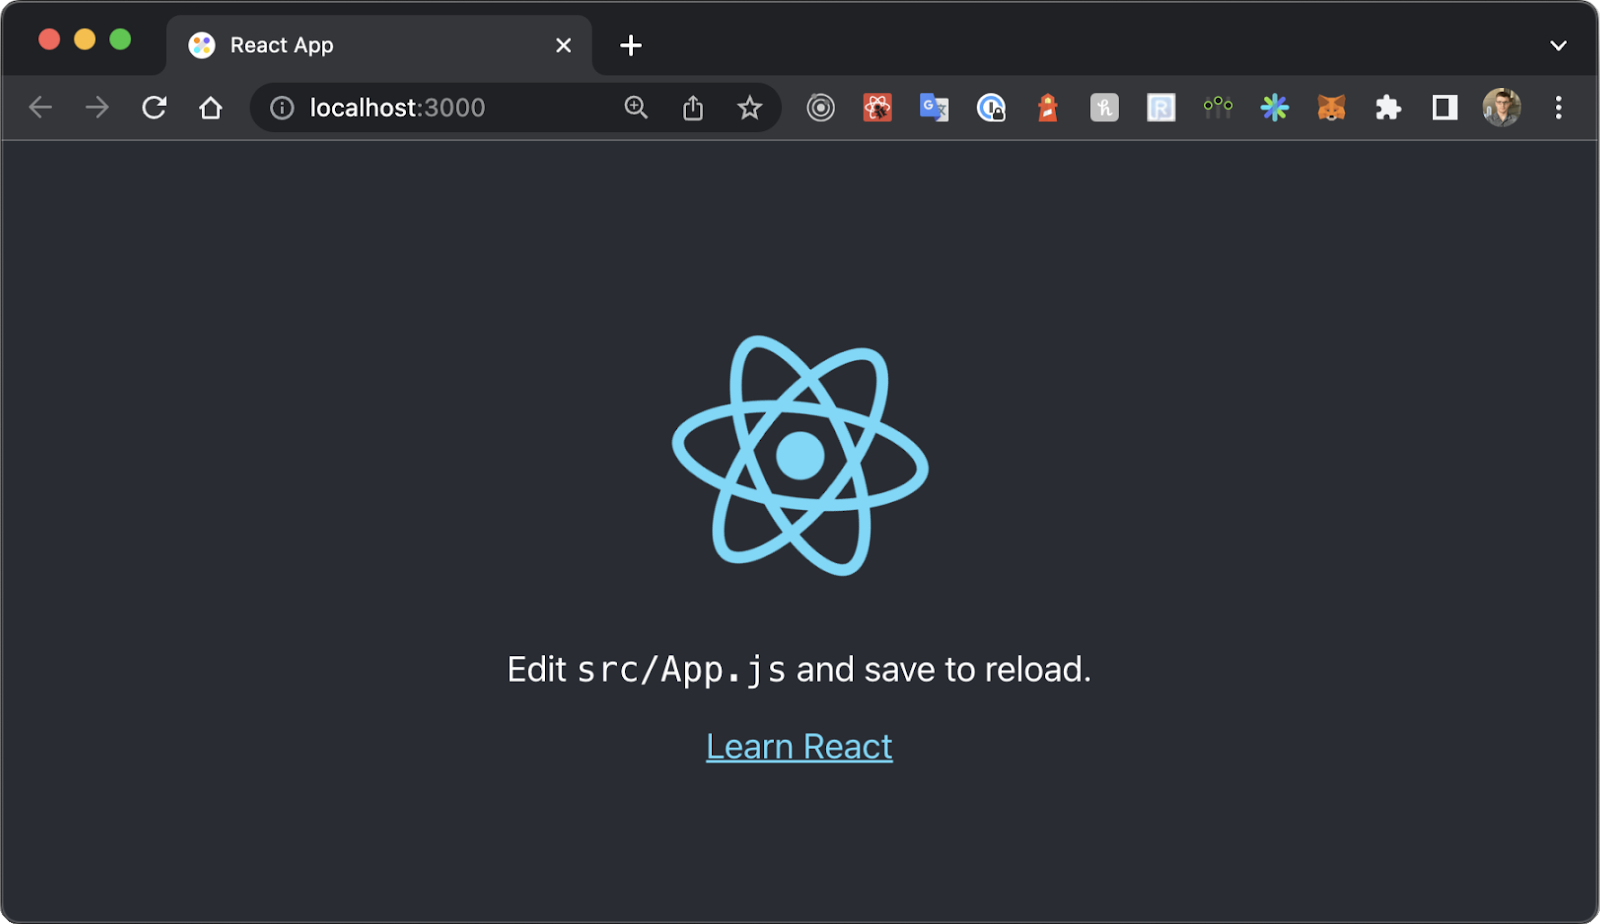 A webpage with the URL "localhost:3000" shows the React logo. On the screen, a line of text says “Edit src/App.js and save to reload,” and has a Learn React link beneath it.